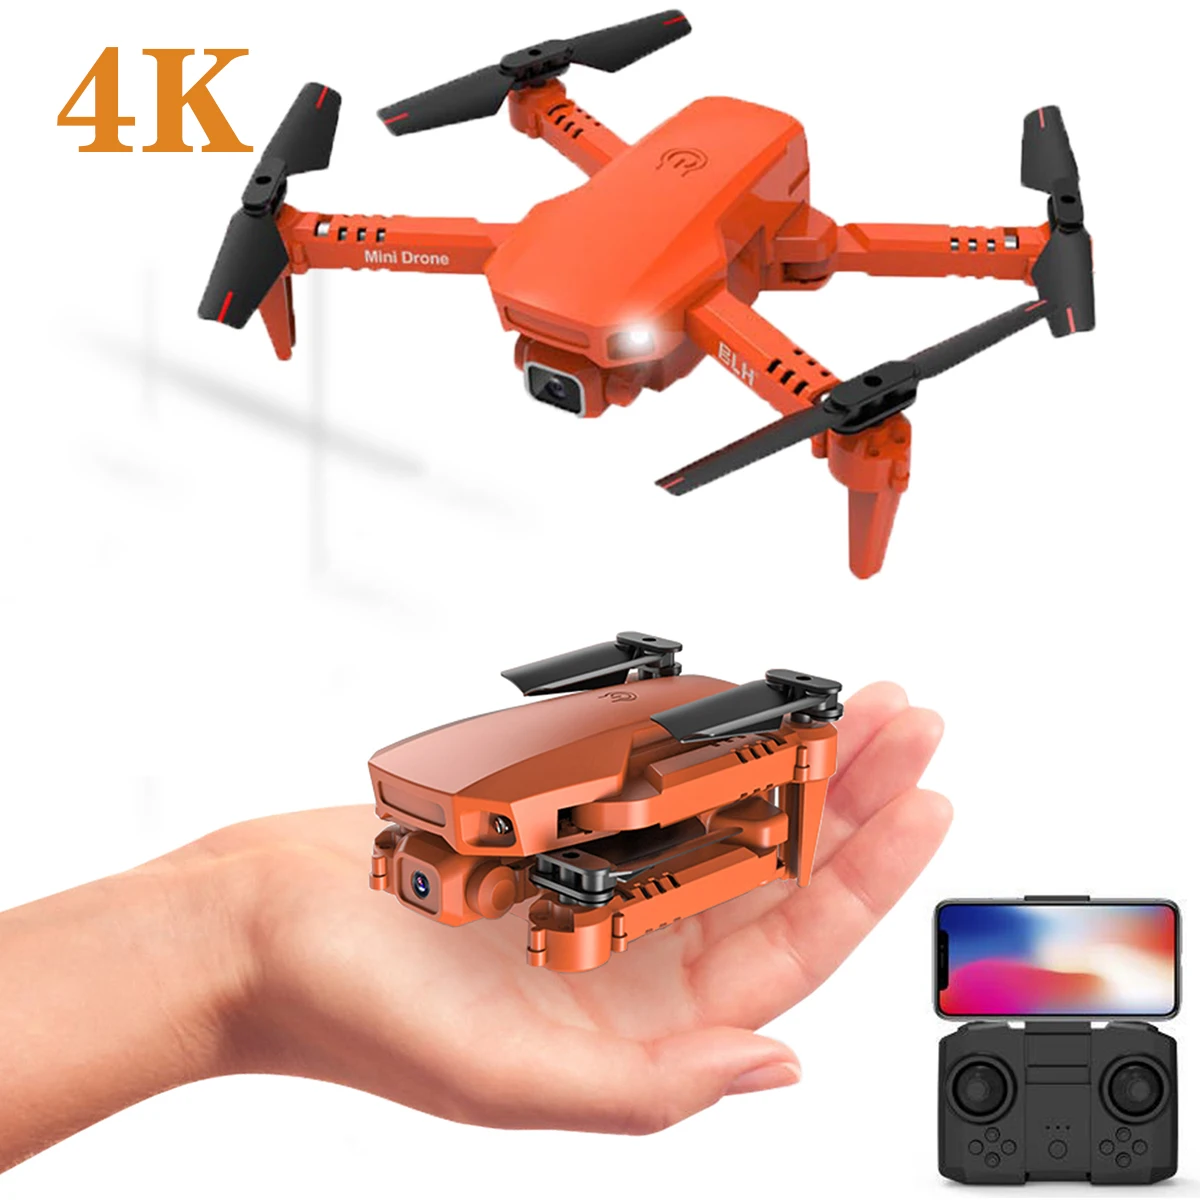 

2021 New Drone 4k HD Dual Camera 1080P WiFi Fpv Visual Positioning Dron Height Preservation Rc Quadcopter, Black,orange